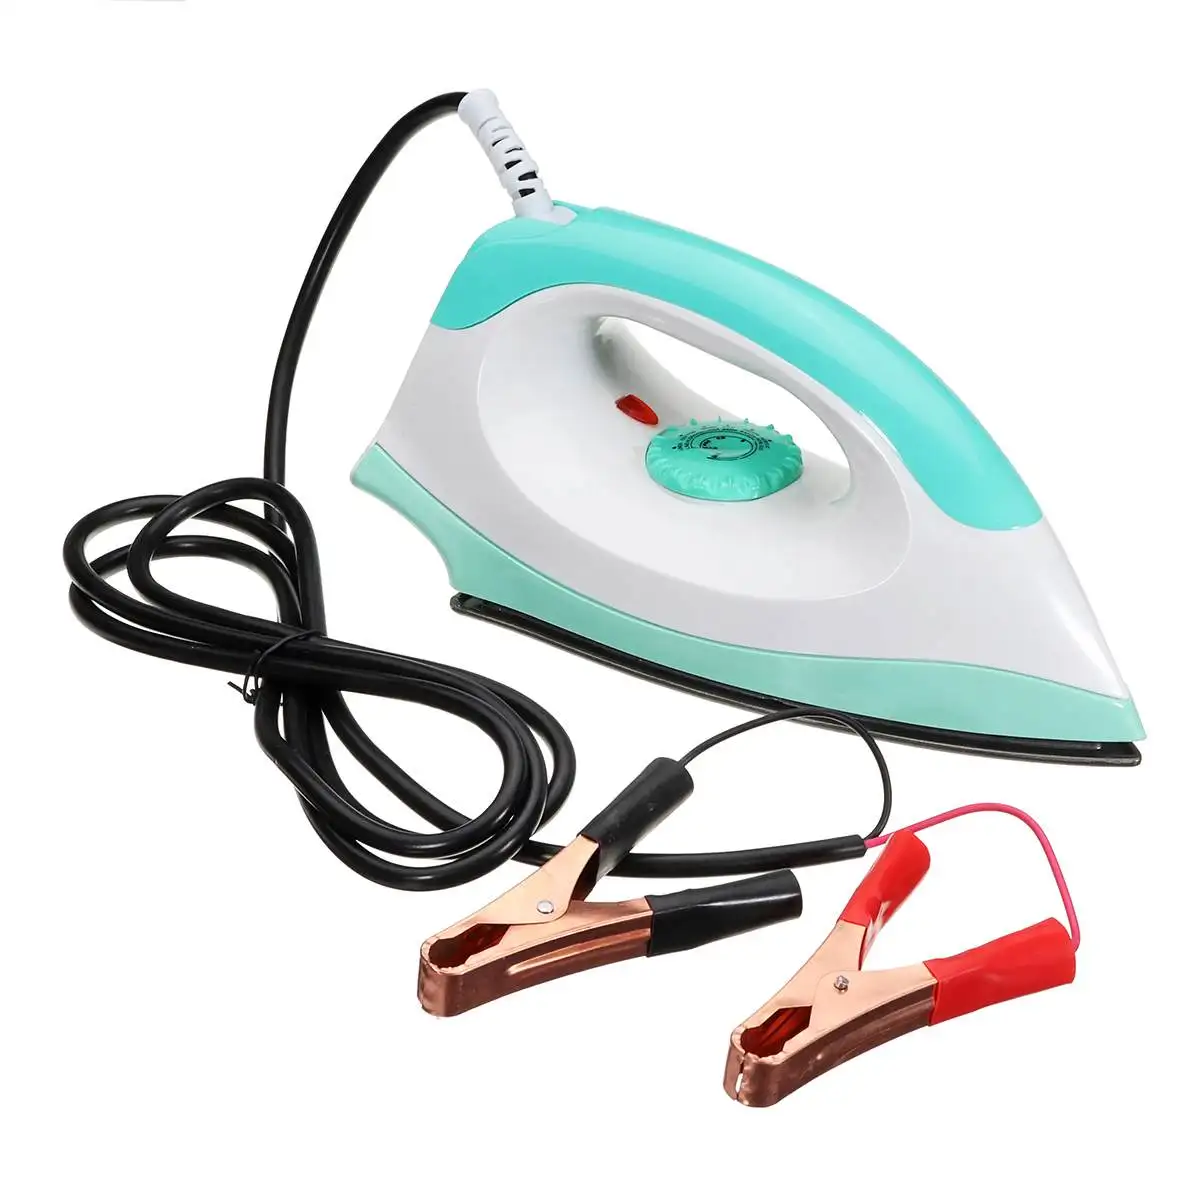 

12V Portable Electric Irons Electric Clothes Handheld Dry Iron For Camper Travel Outdoor Non-stick Soleplate Automatically